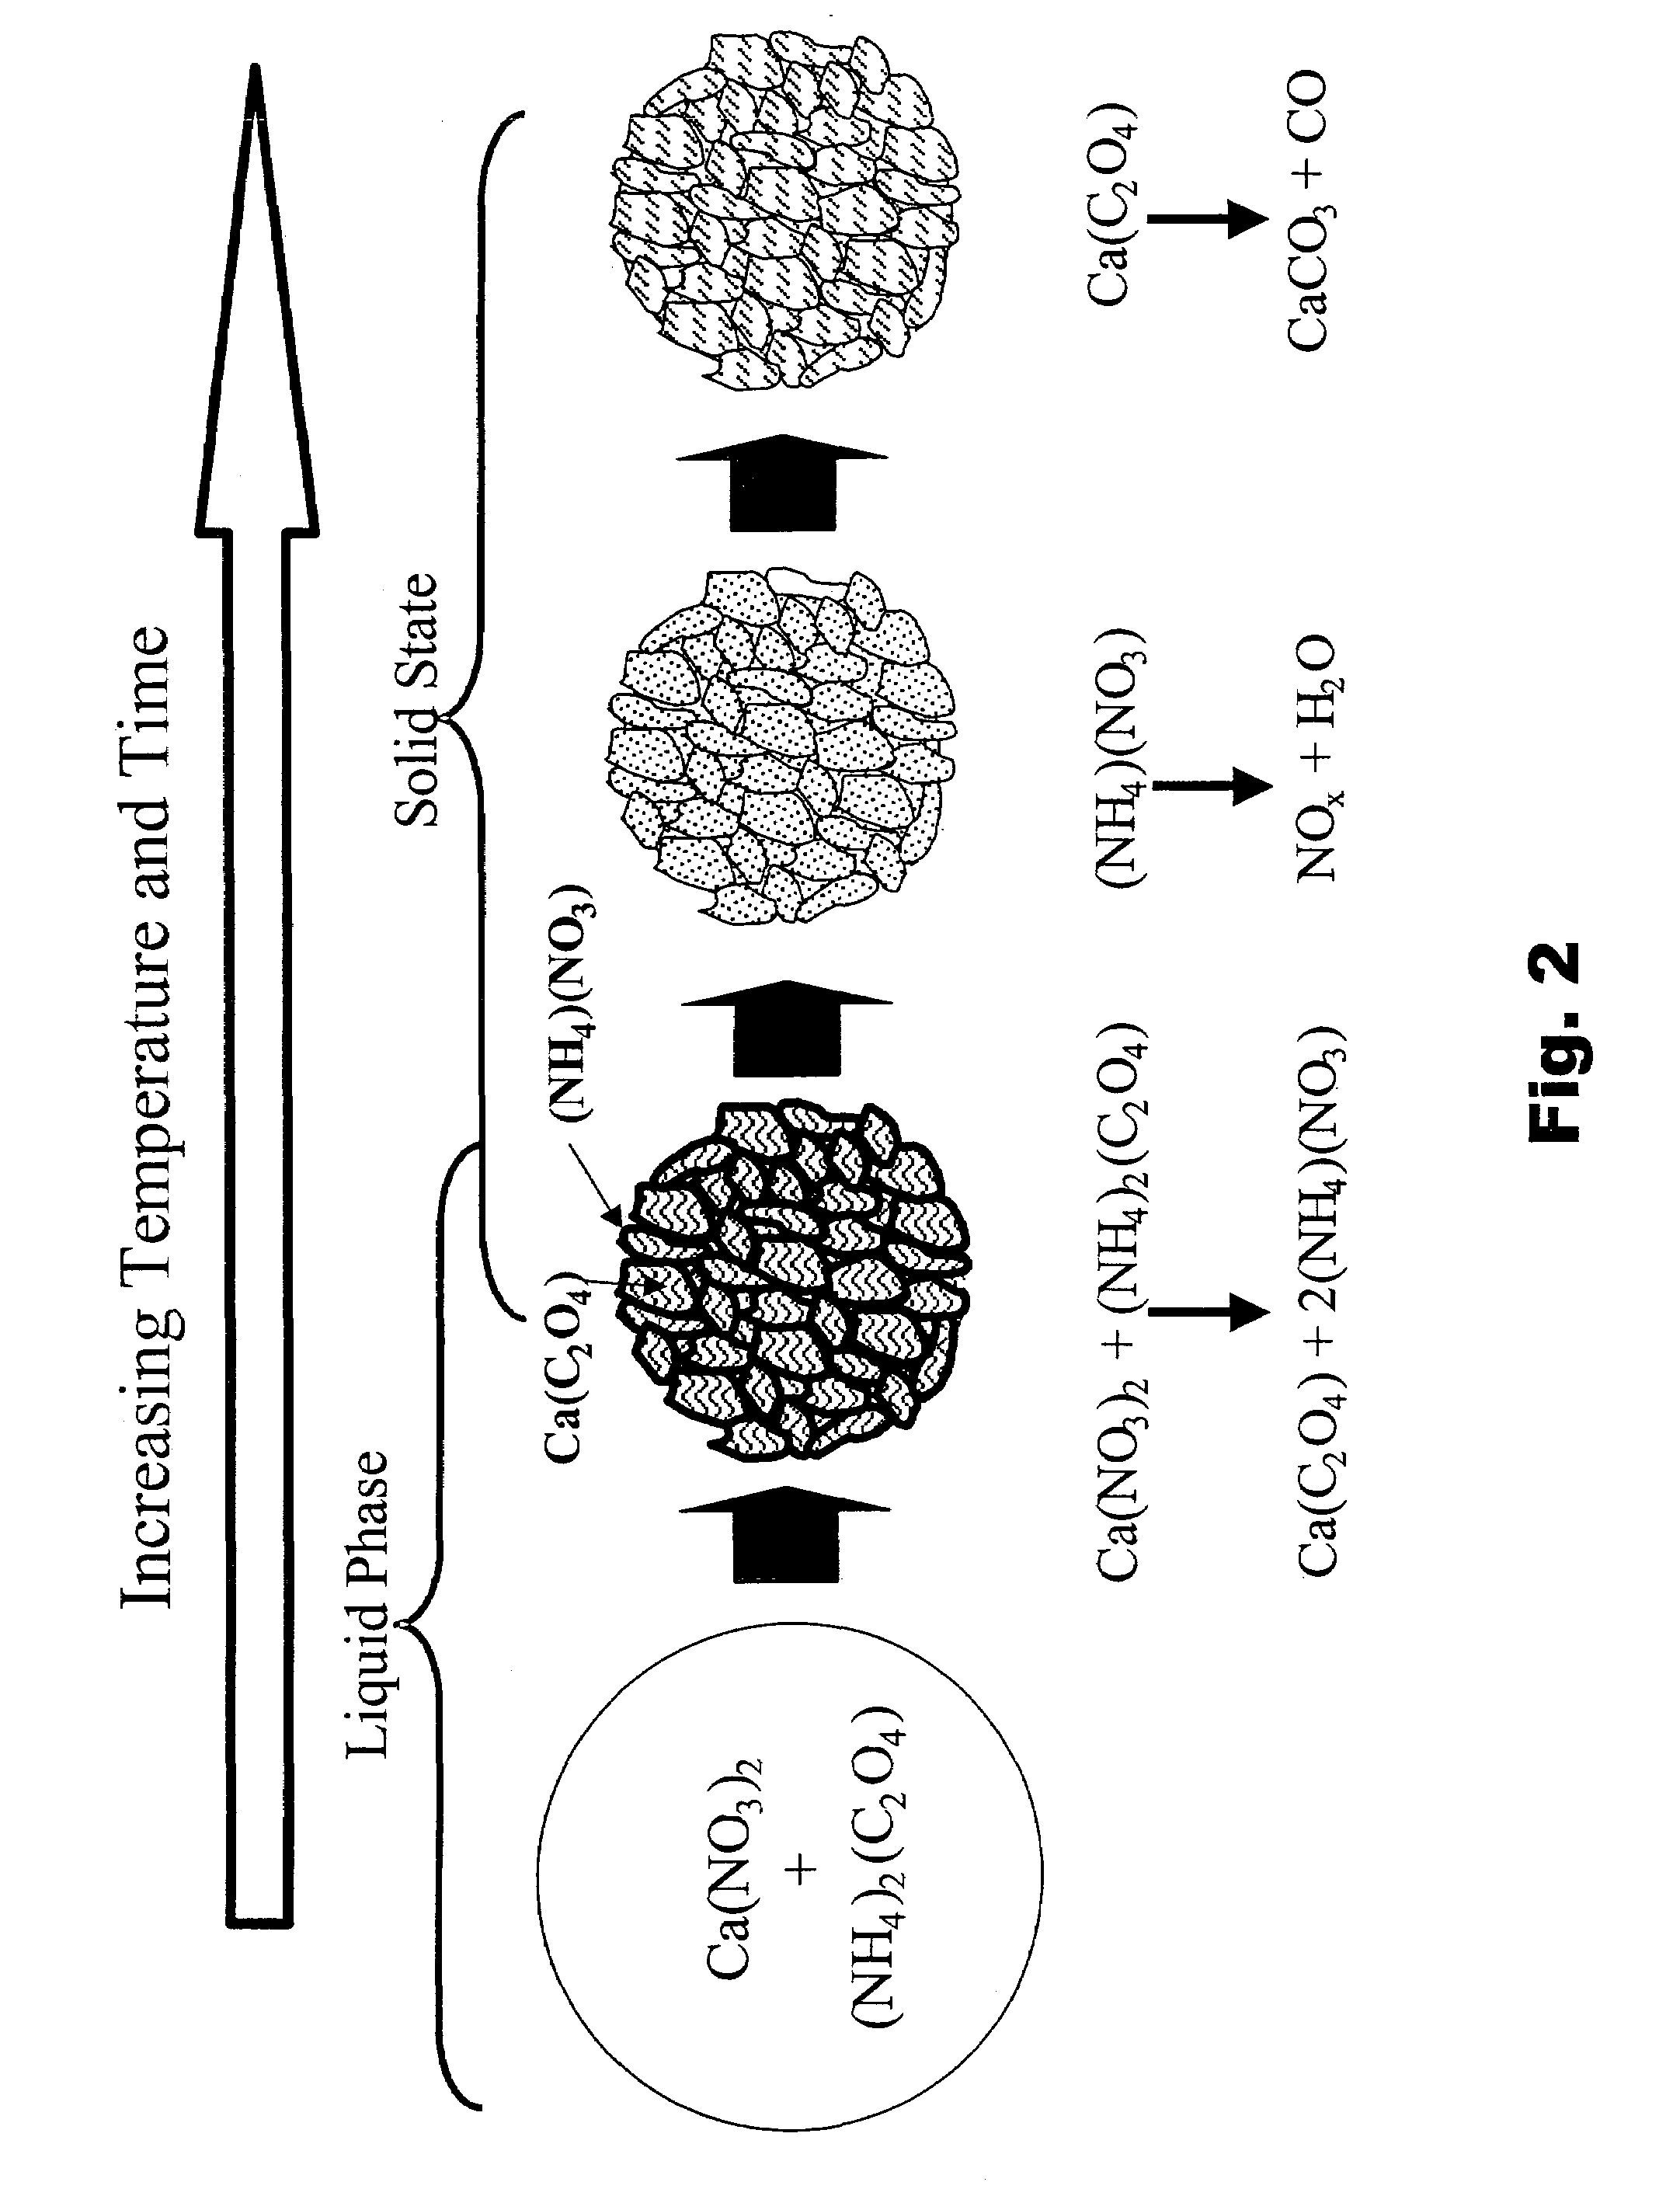 Fuel reformer catalyst and absorbent materials